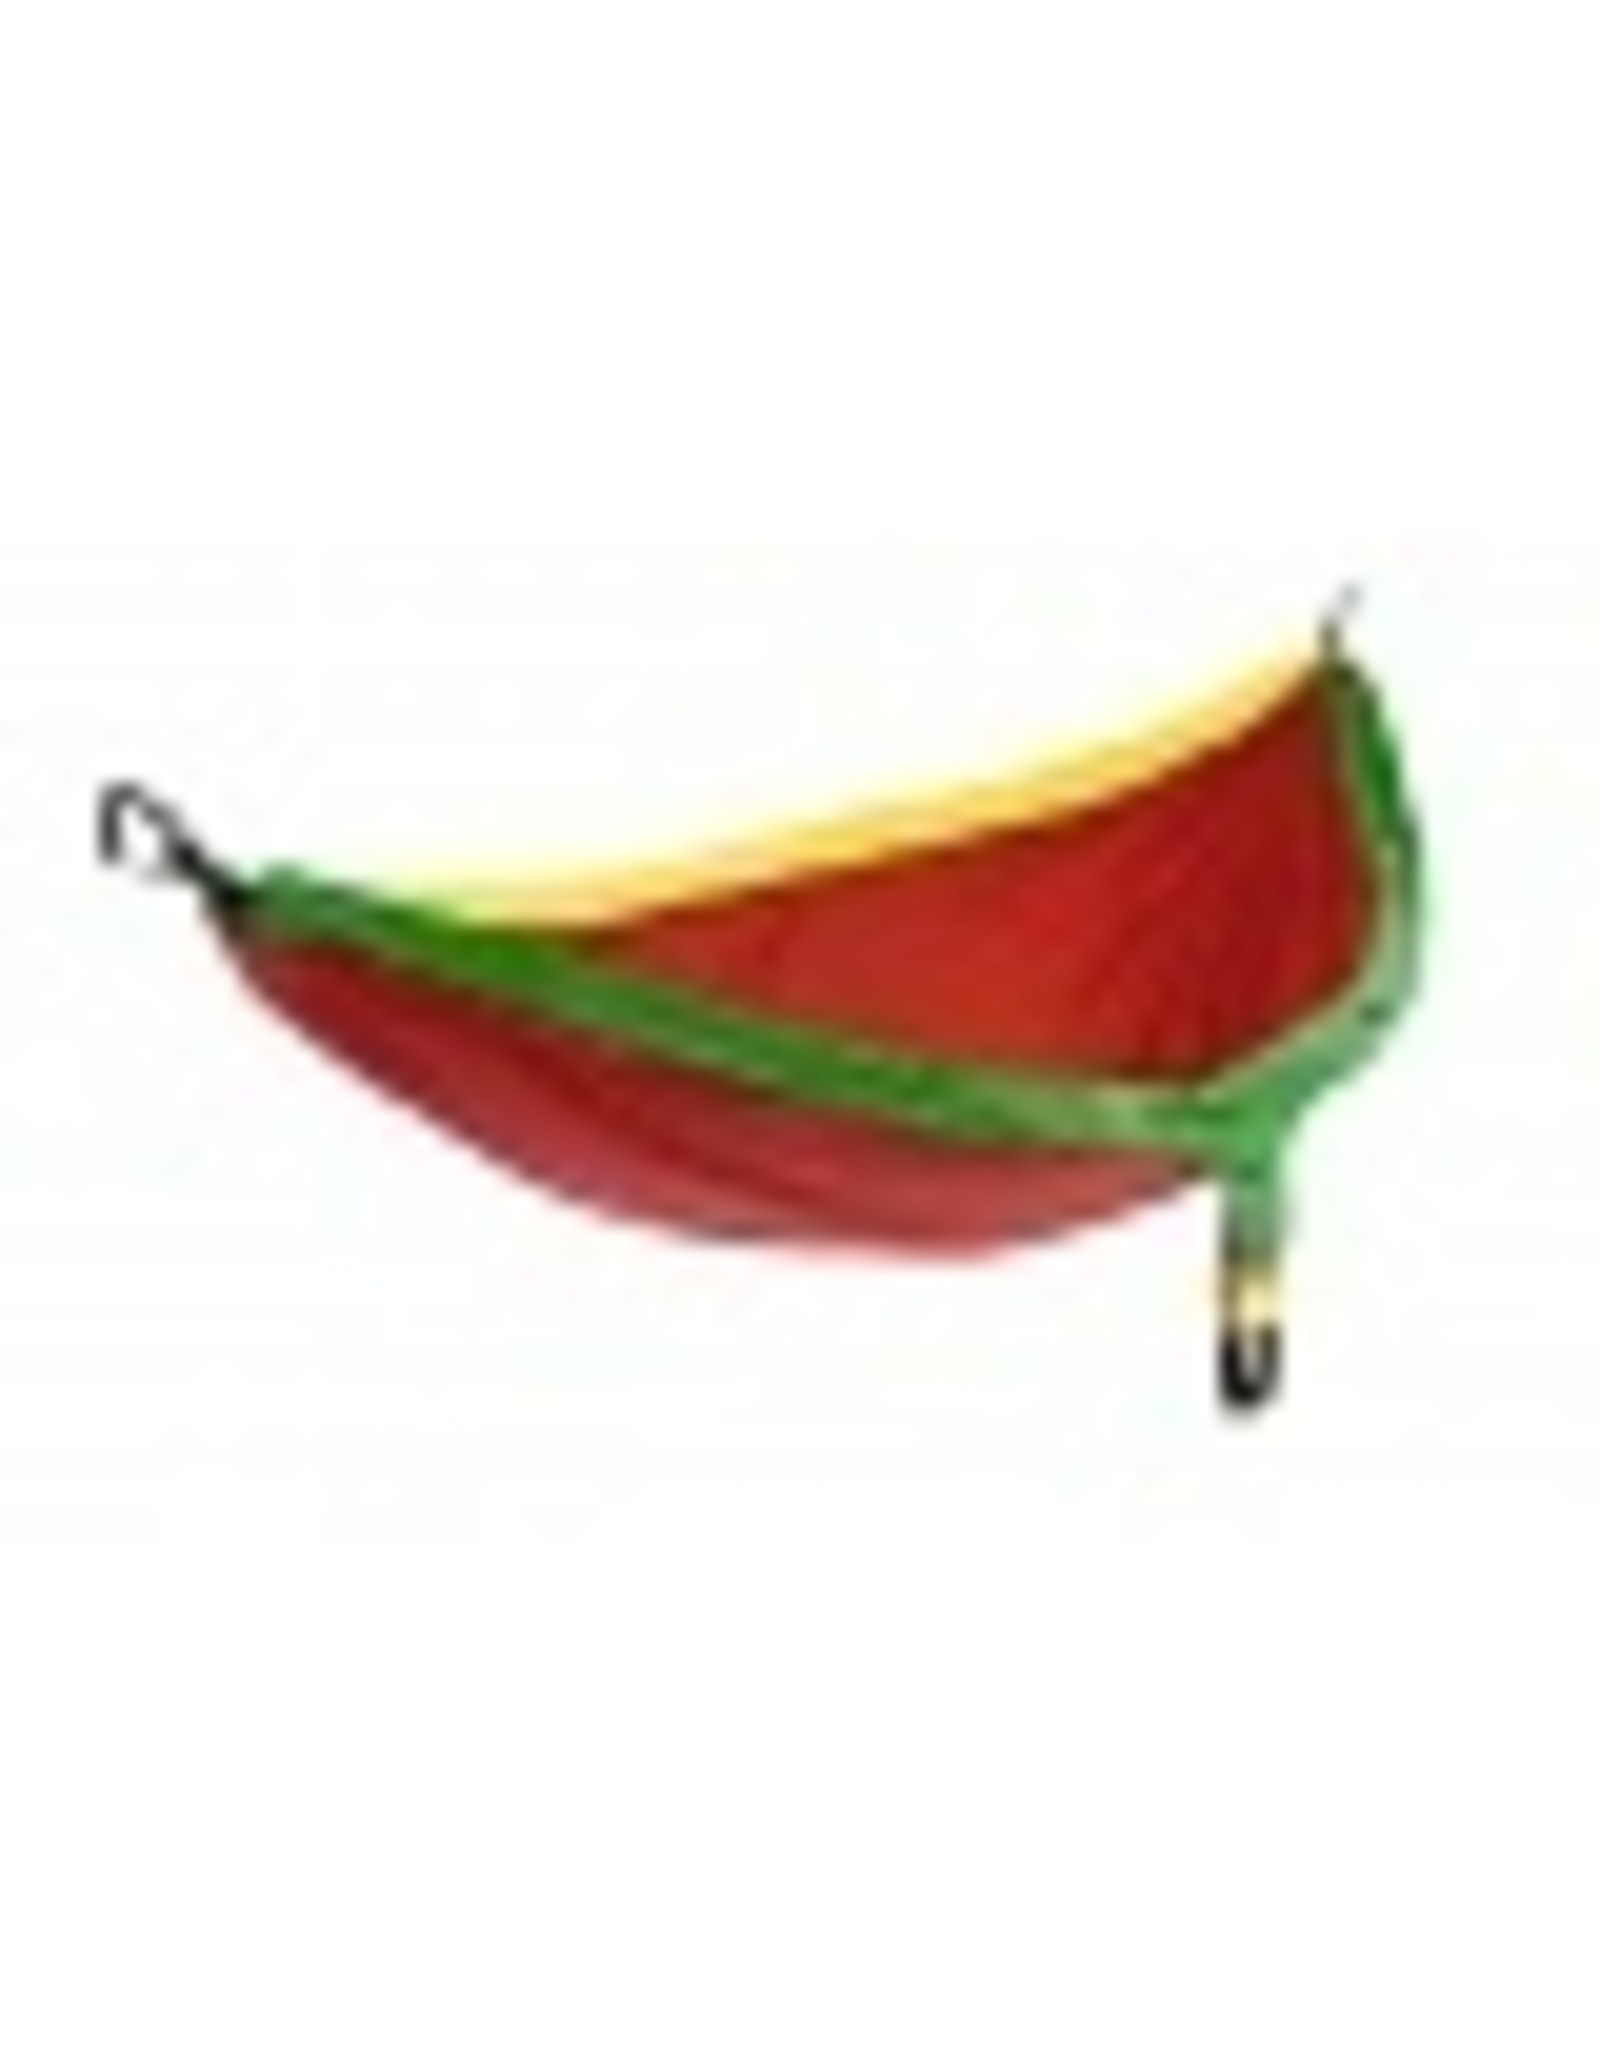 ENO - Eagles Nest Outfitters SINGLENEST